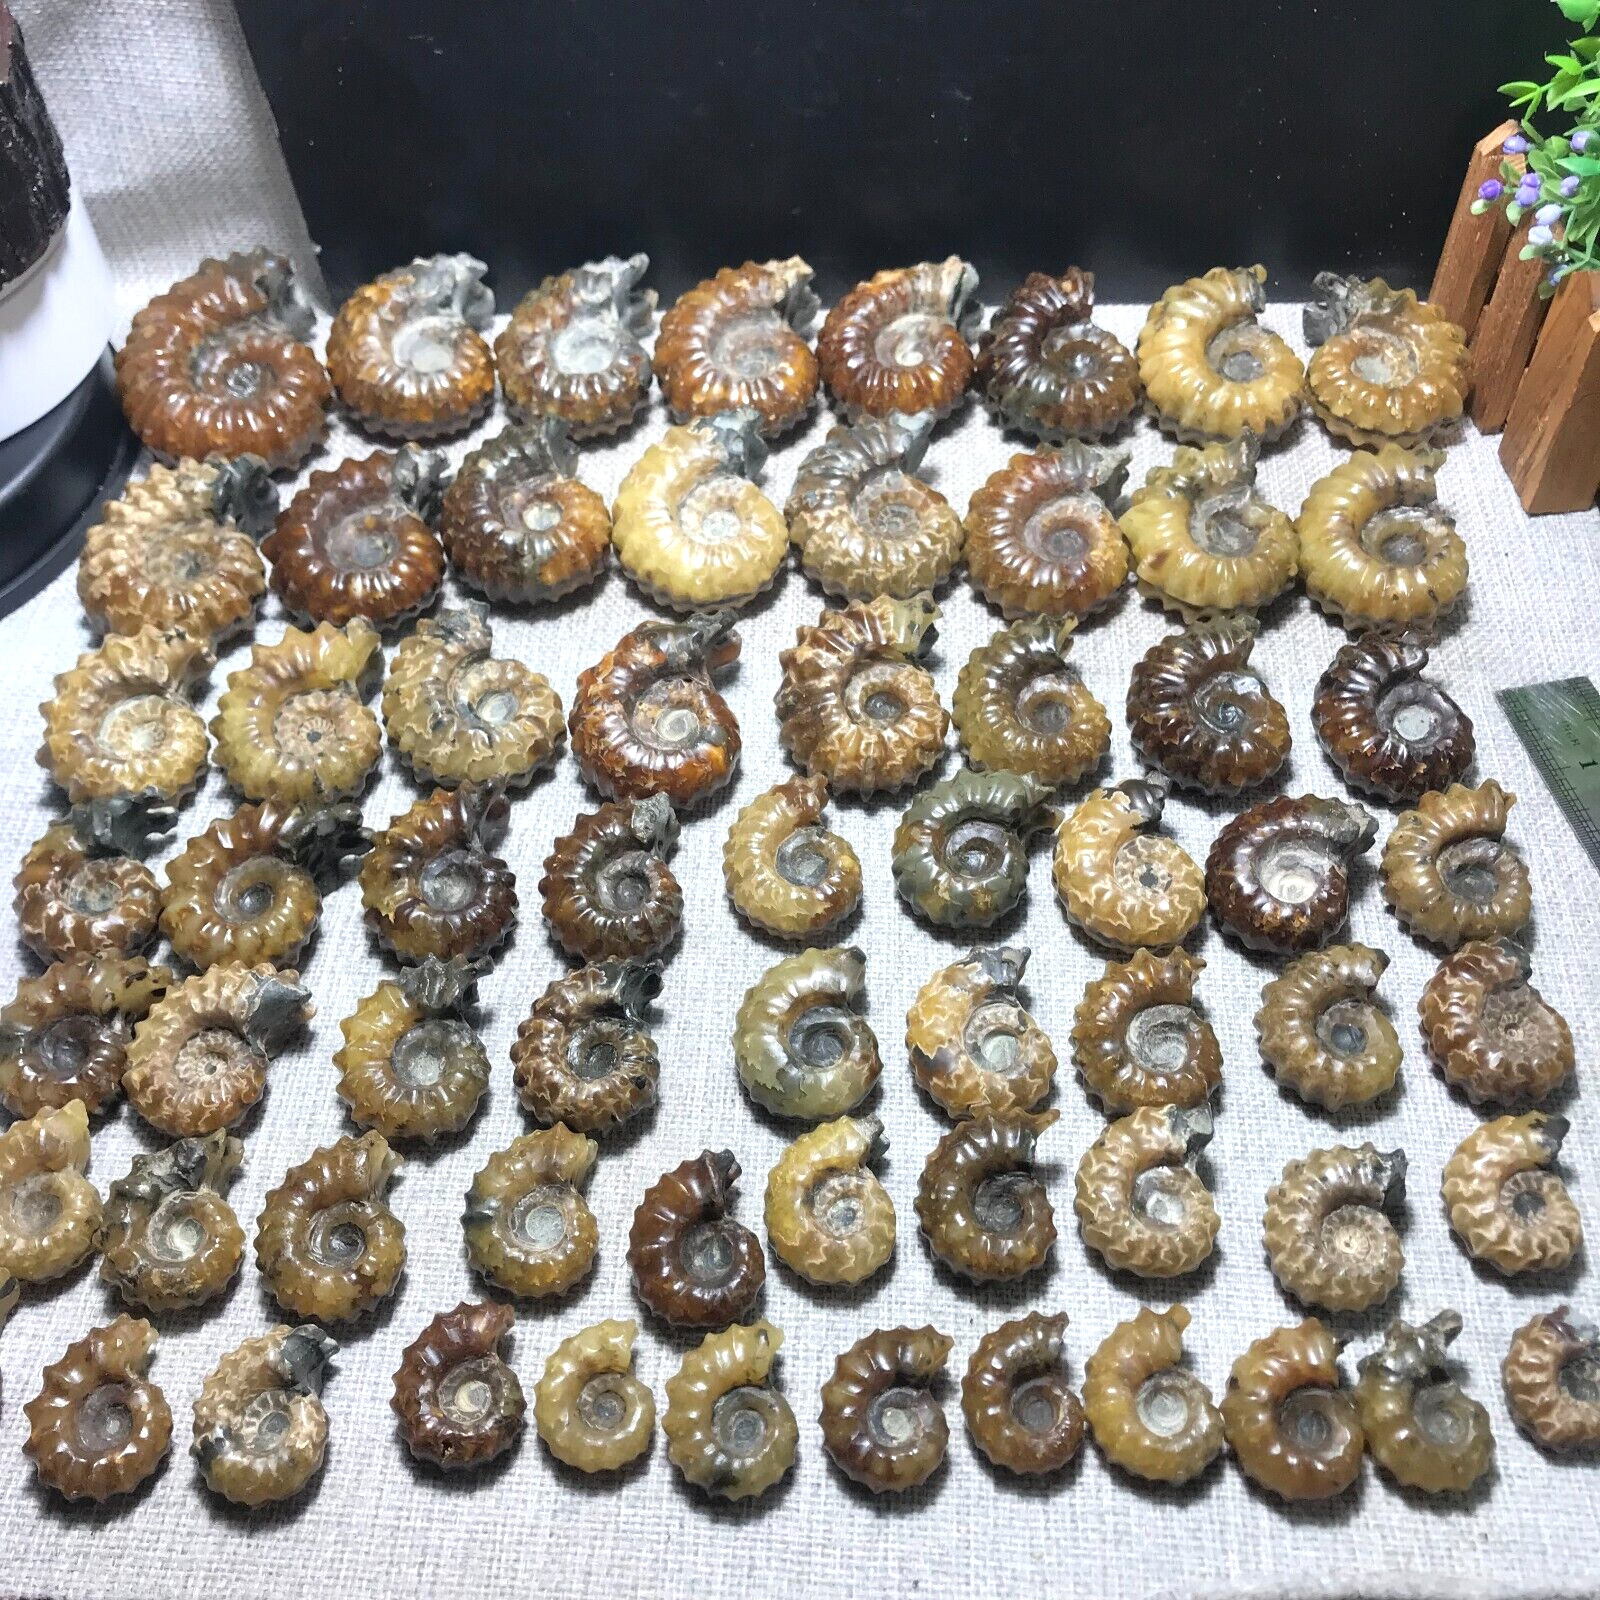 80--100g 1pcs Natural Polished Goat Horn Snail Ammonite fossil from Madagascar